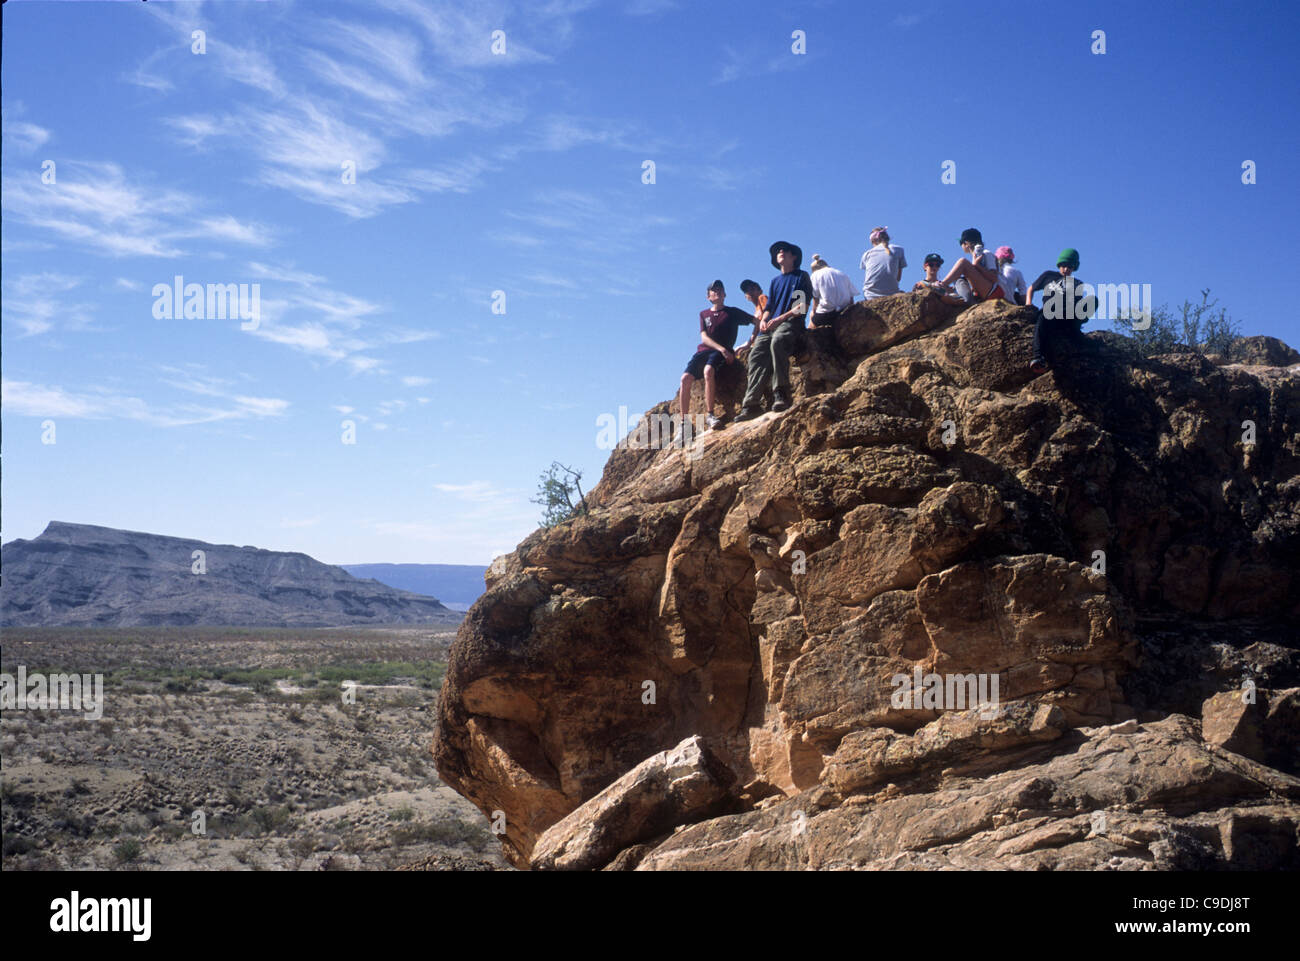 The Chimneys rock formation is a popular hiking spot on the west side of Big Bend National Park in west Texas. Stock Photo